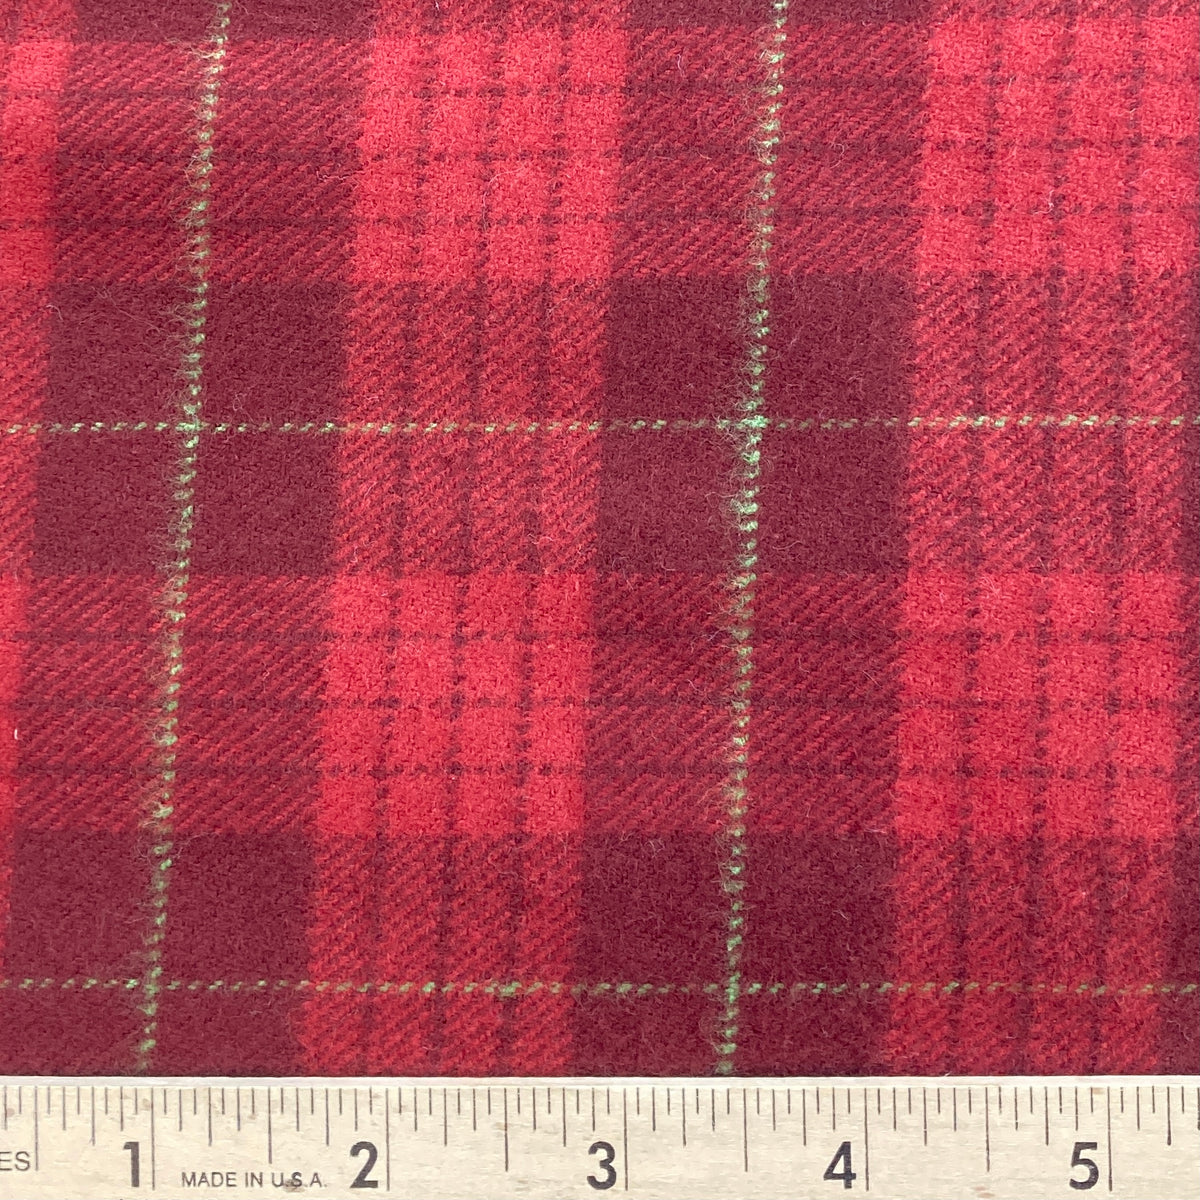 Inv # 63148 Continuous Yardage Red Plaid Primo Plaid Yarn Dyed Flannel from Marcus Fabrics